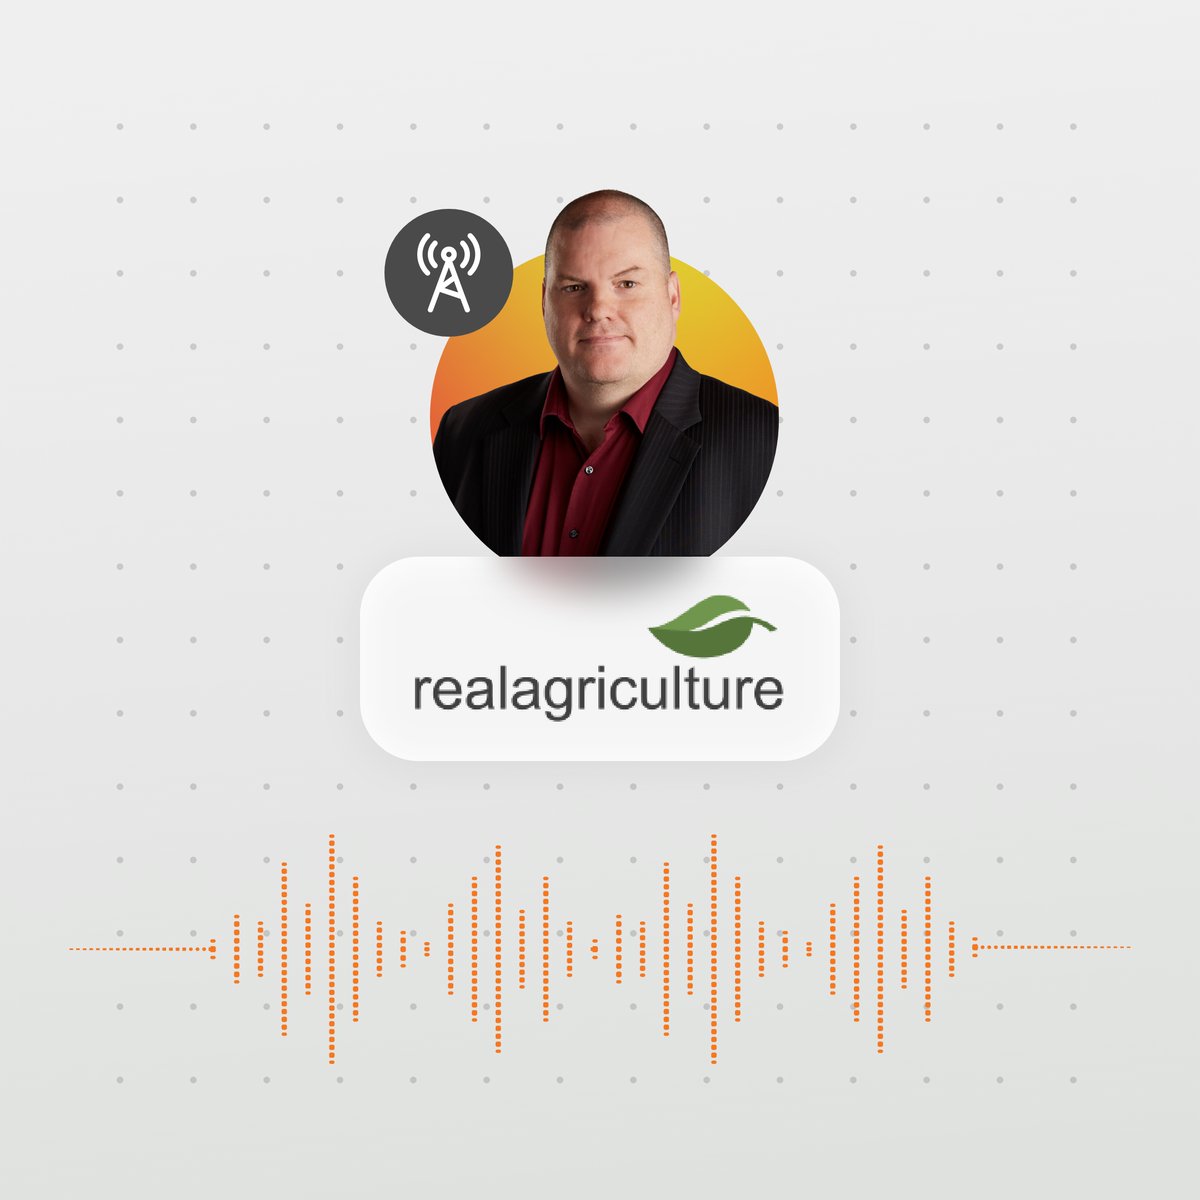 Did you catch Real Ag Radio last week featuring our own Neil Townsend? If you didn't tune in and want the latest insights on grain markets and the grain issues in the Black Sea region, listen here - rb.gy/0v60gd

@kidcorn1 @realagriculture @realloudlyndsey
#RealAgRadio